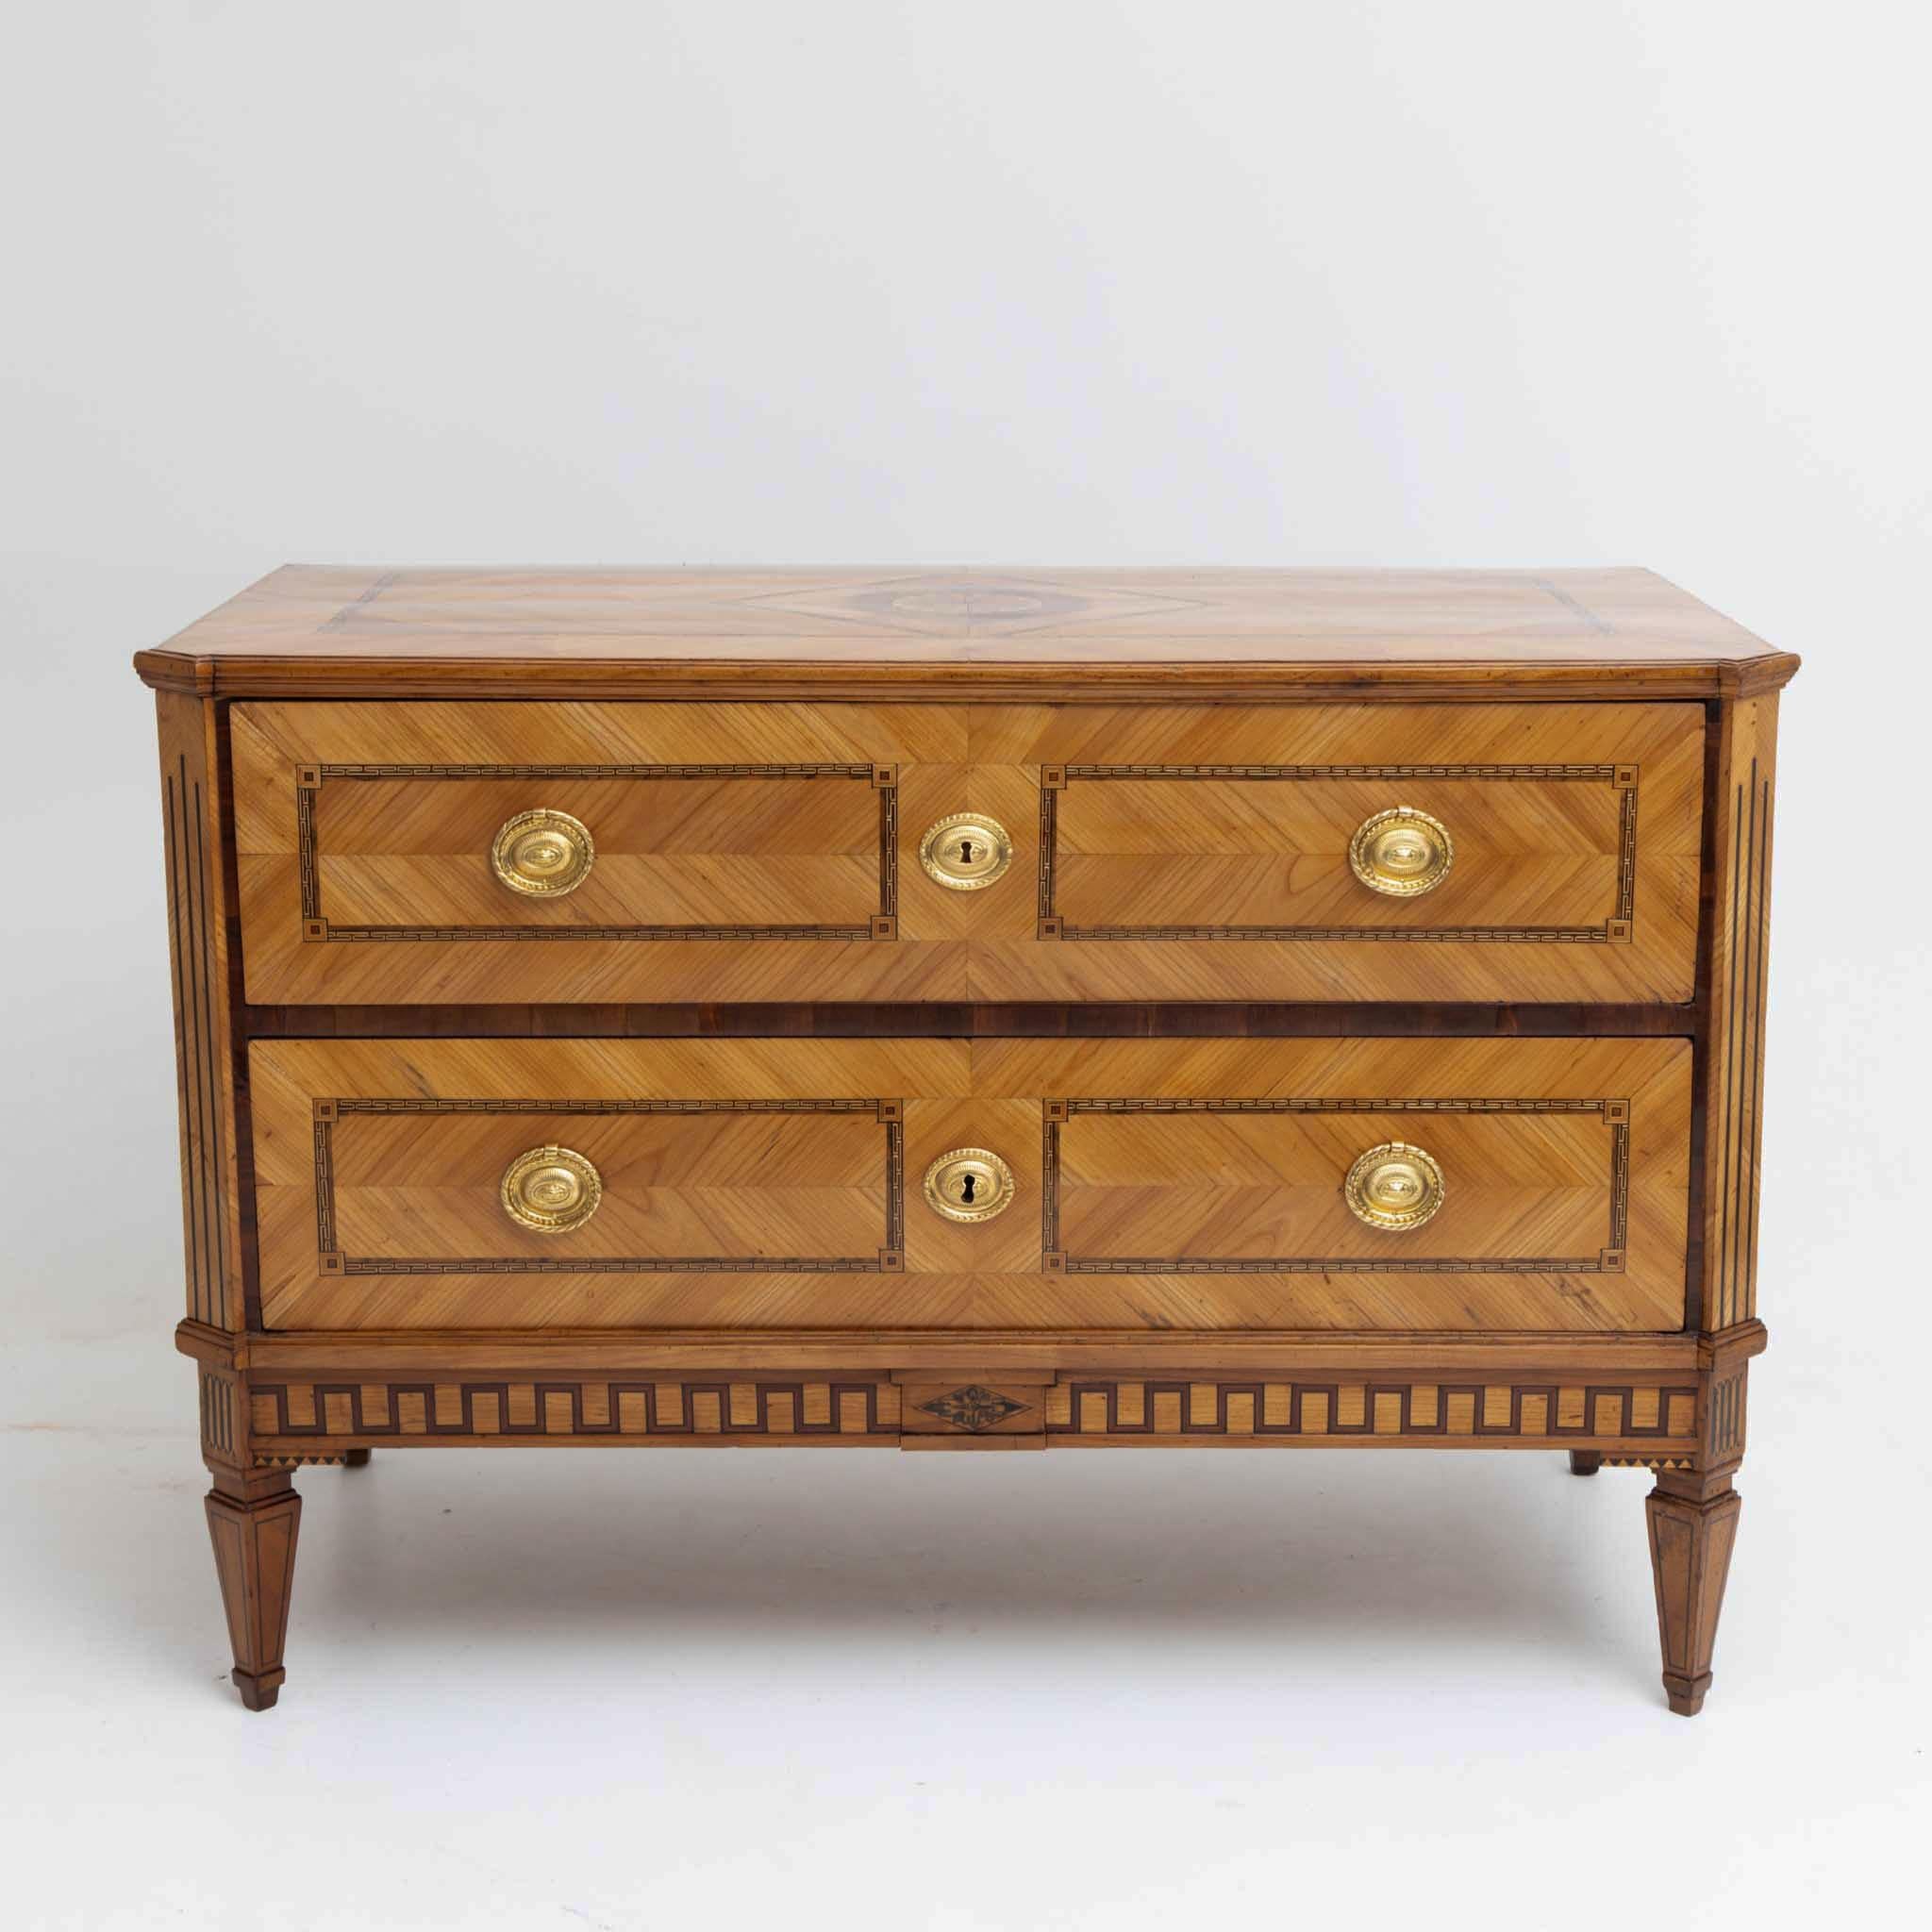 Louis Seize chest of drawers with beveled corners and two drawers. The dresser stands on square tapered feet and shows inlay work in the form of meander and filling fields on all sides. The dresser has been restored and hand polished.